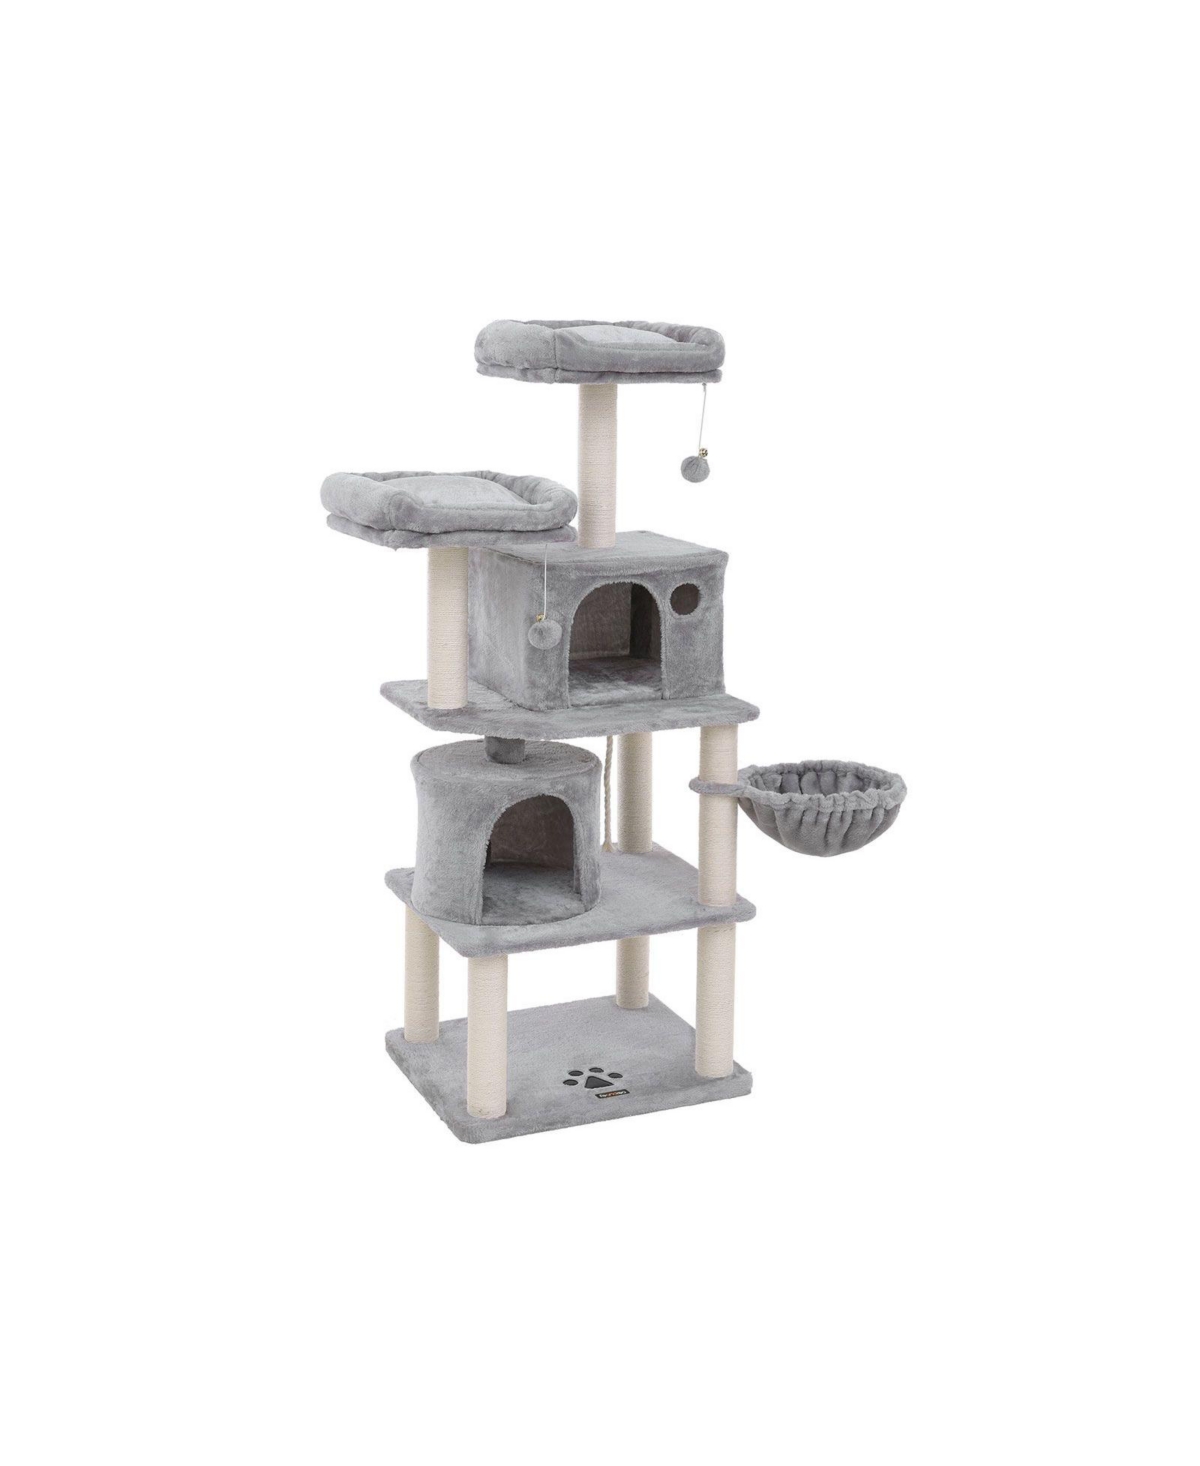 Multi-Level Cat Tree with Sisal-Covered Scratching Posts, Plush Perches, Basket and 2 Condos, Cat Tower Furniture - for Kittens, Cats and Pe